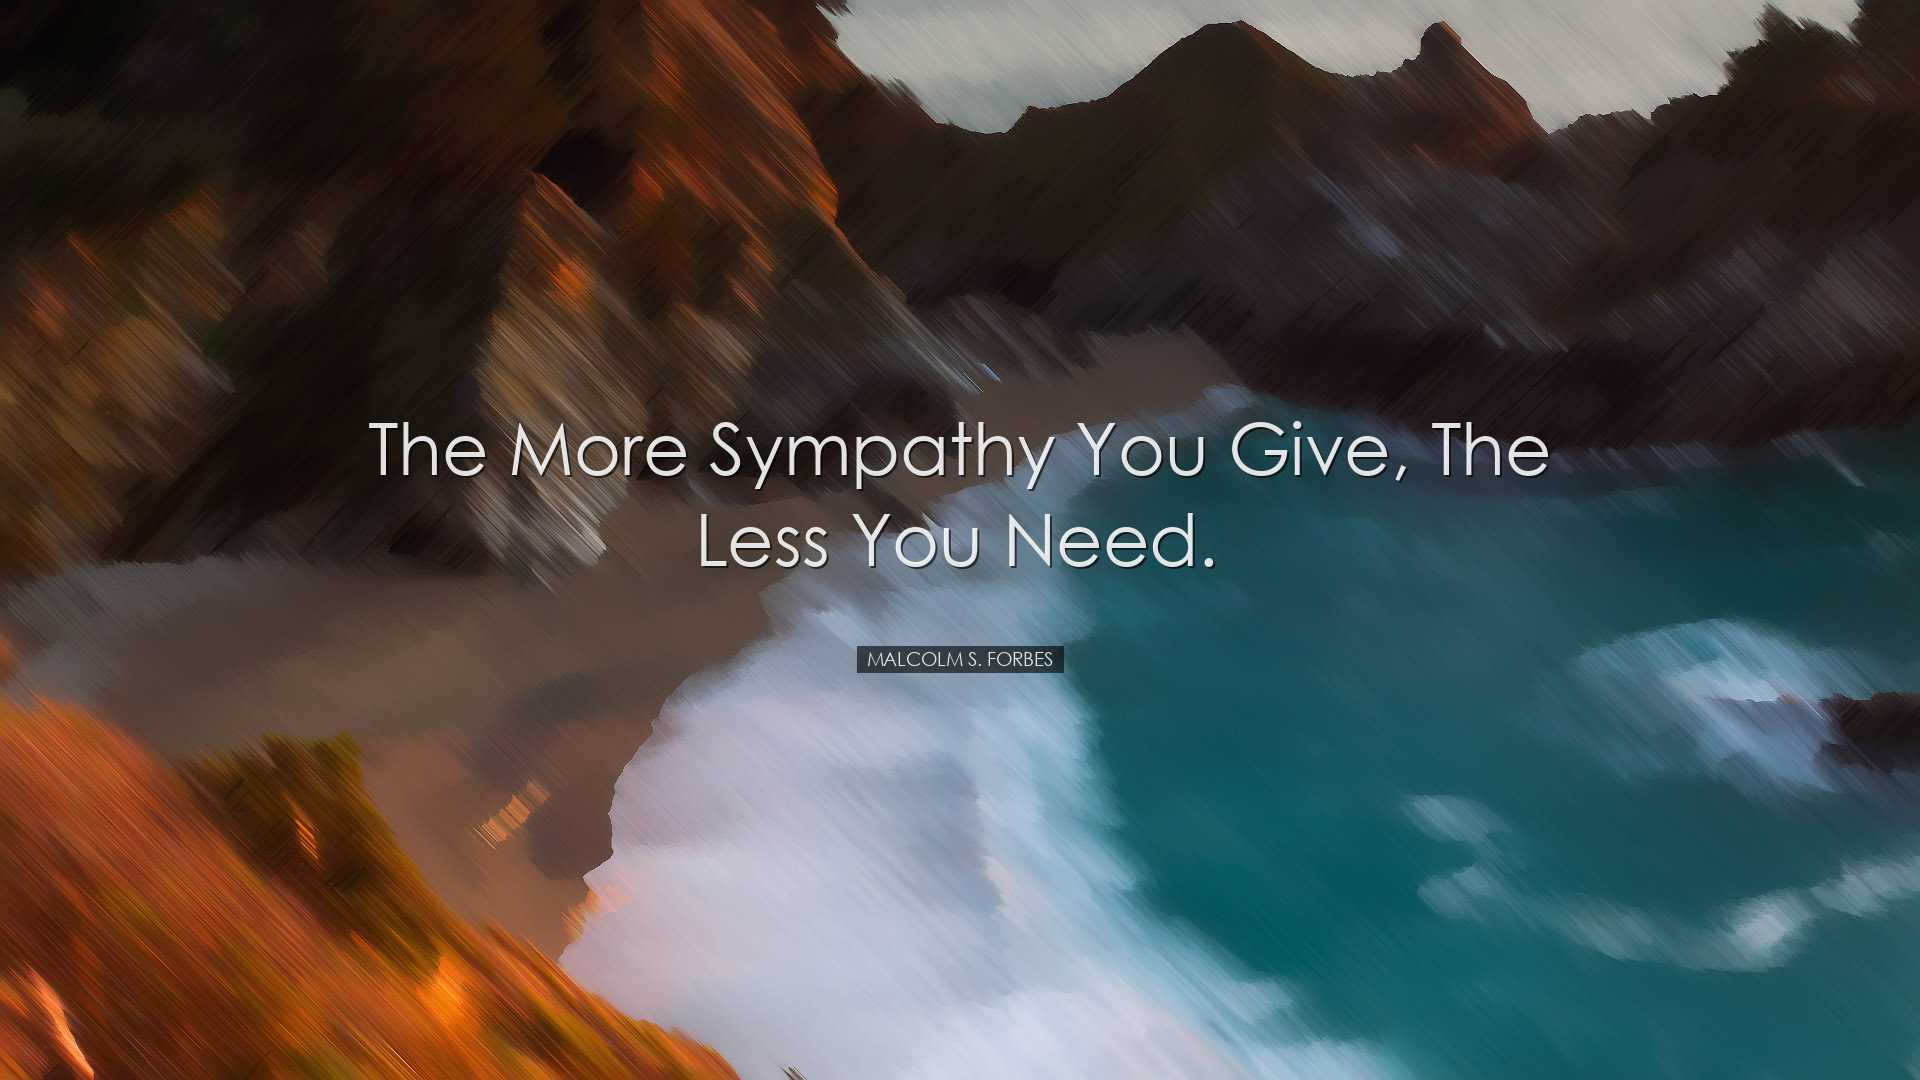 The more sympathy you give, the less you need. - Malcolm S. Forbes